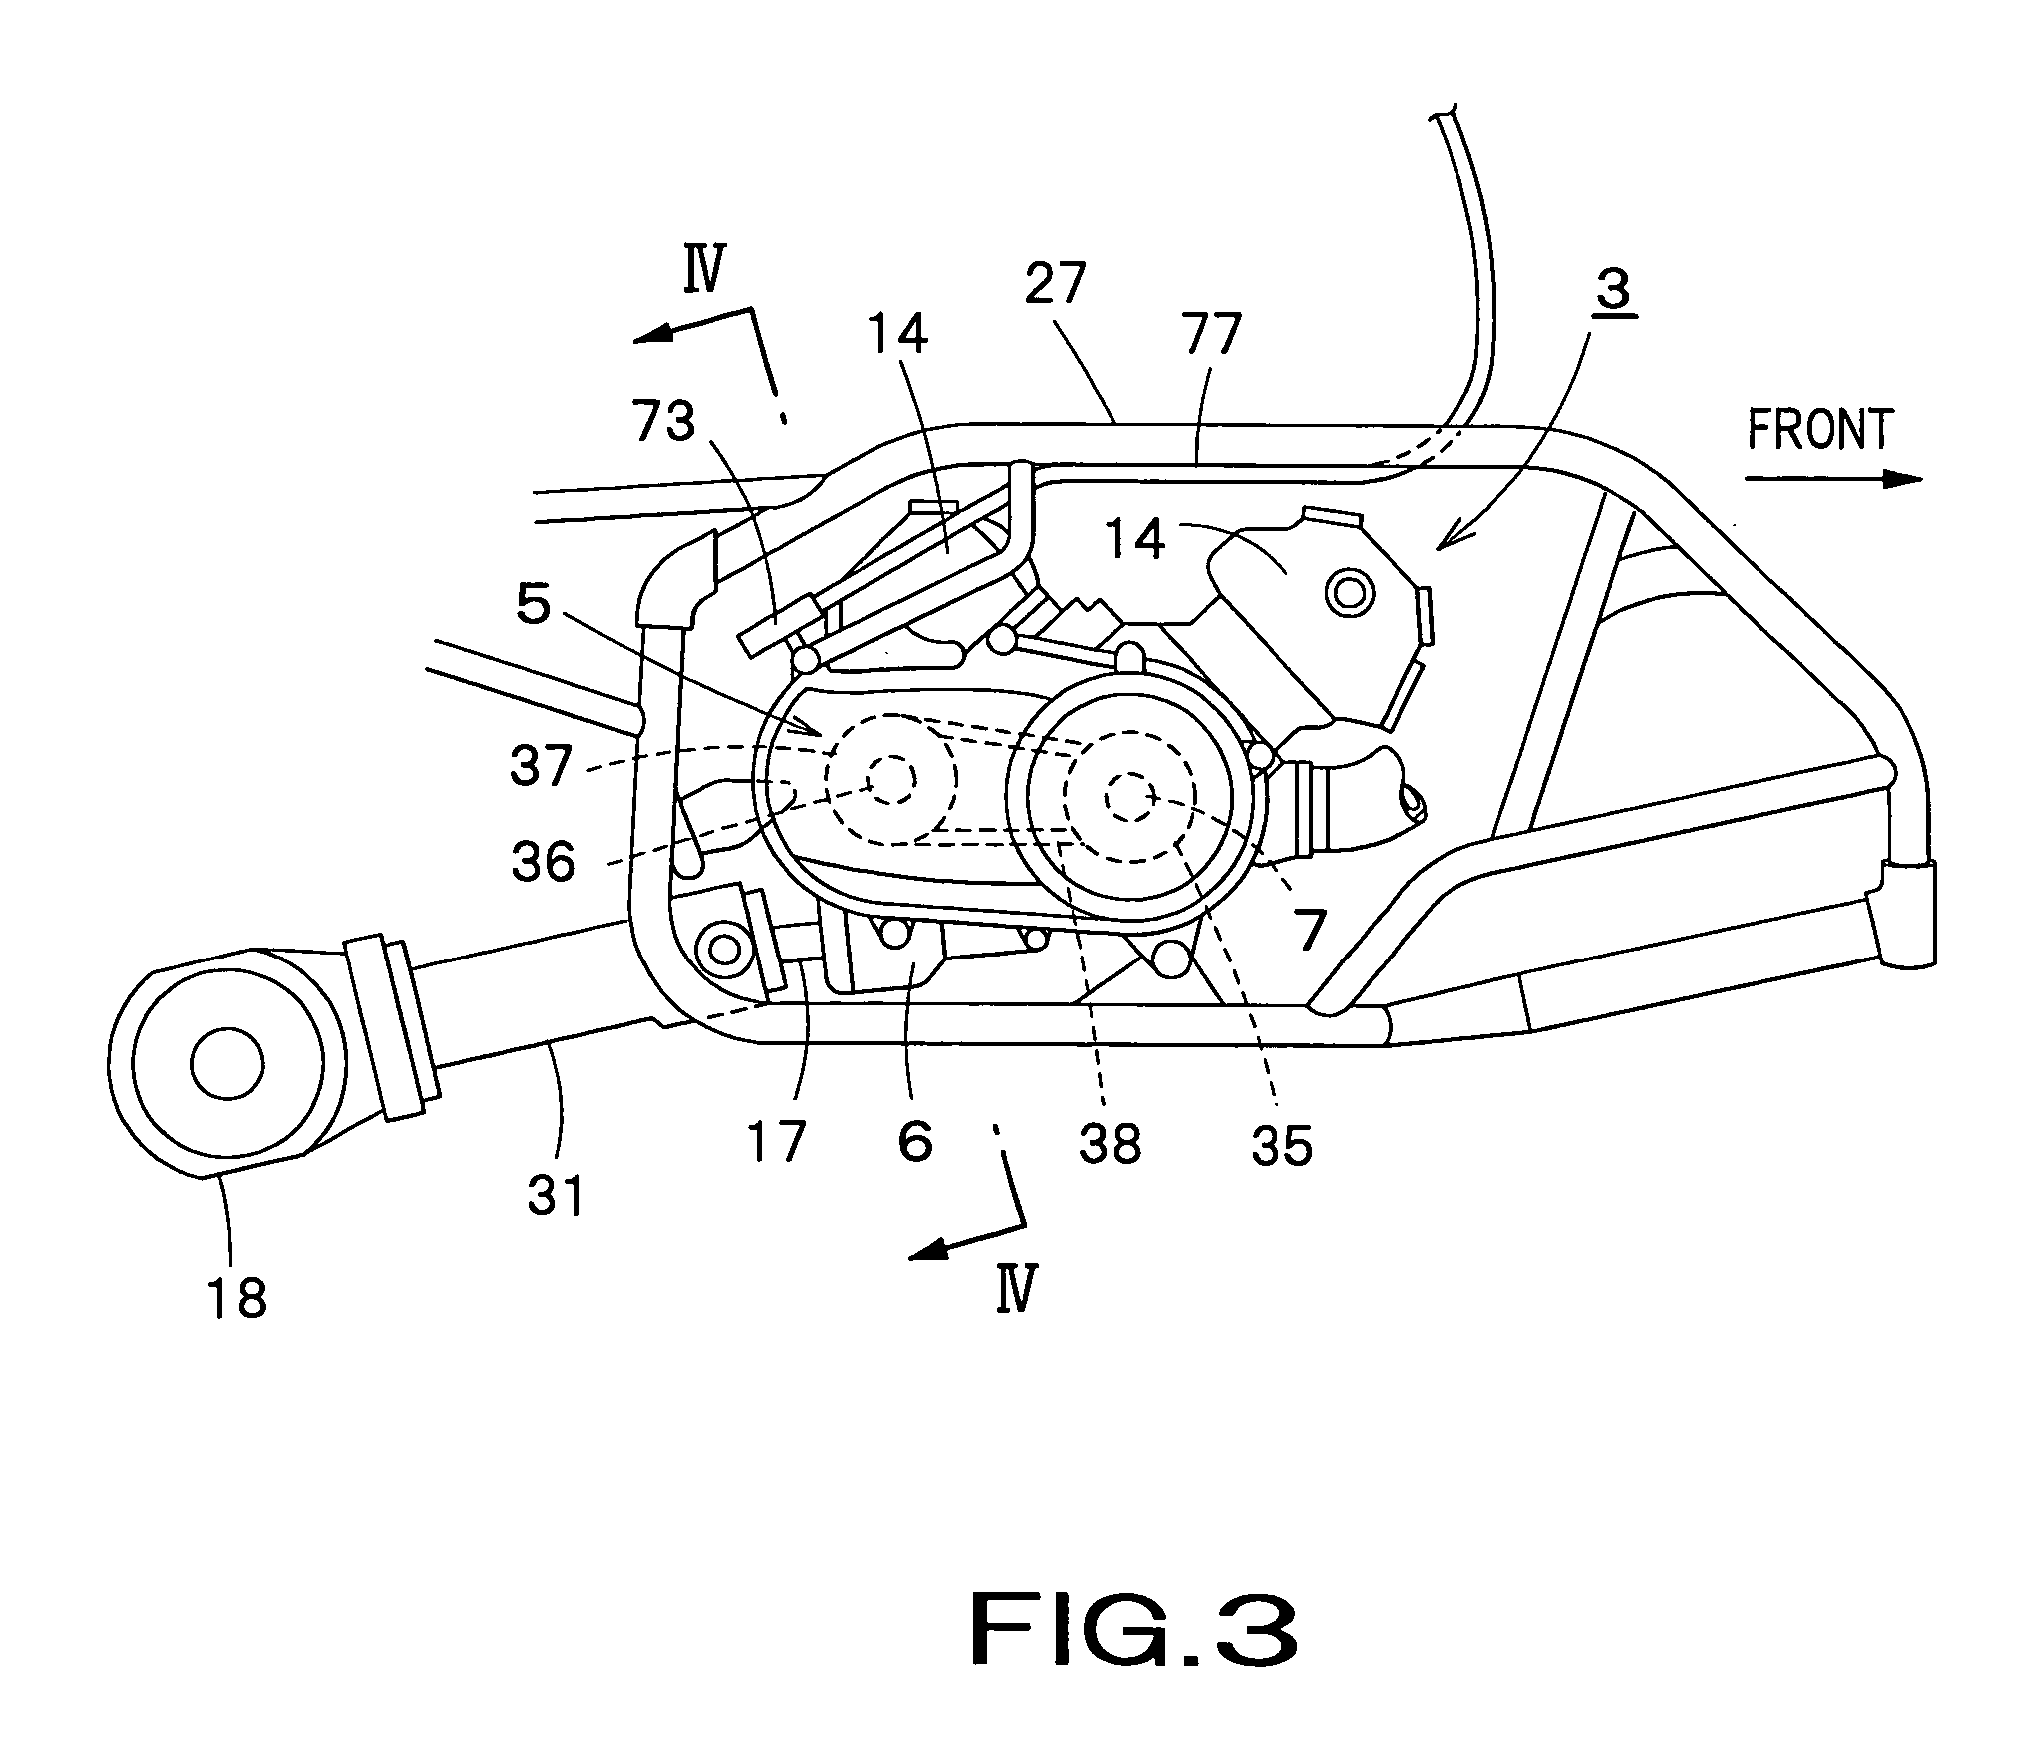 Transmission apparatus of all-terrain vehicle